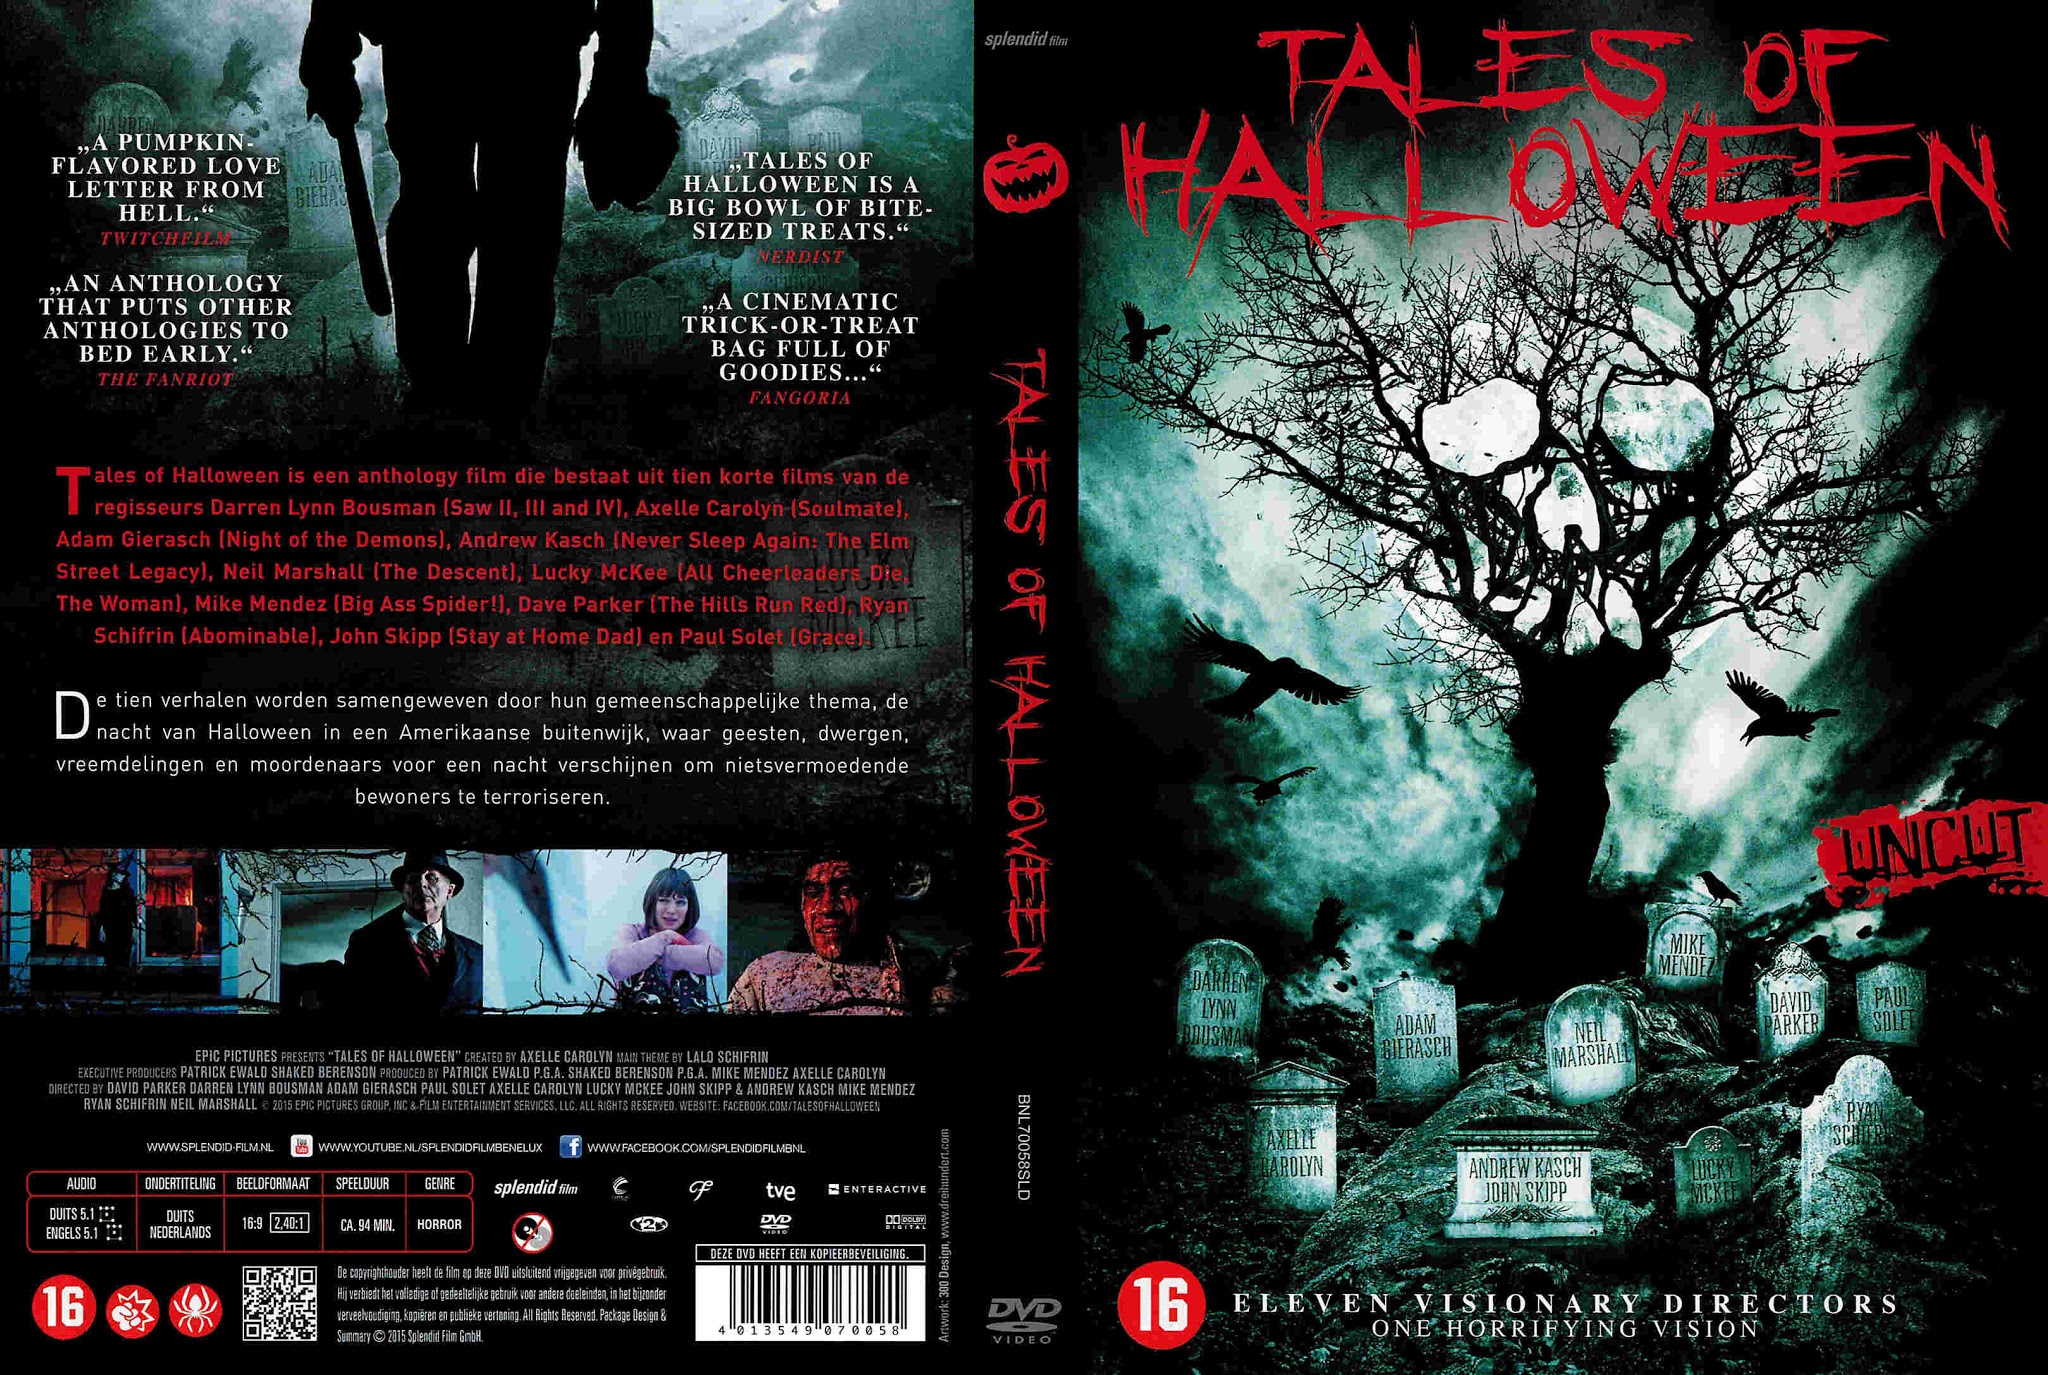 The Horrors of Halloween: Watch TALES OF HALLOWEEN (2015) Full